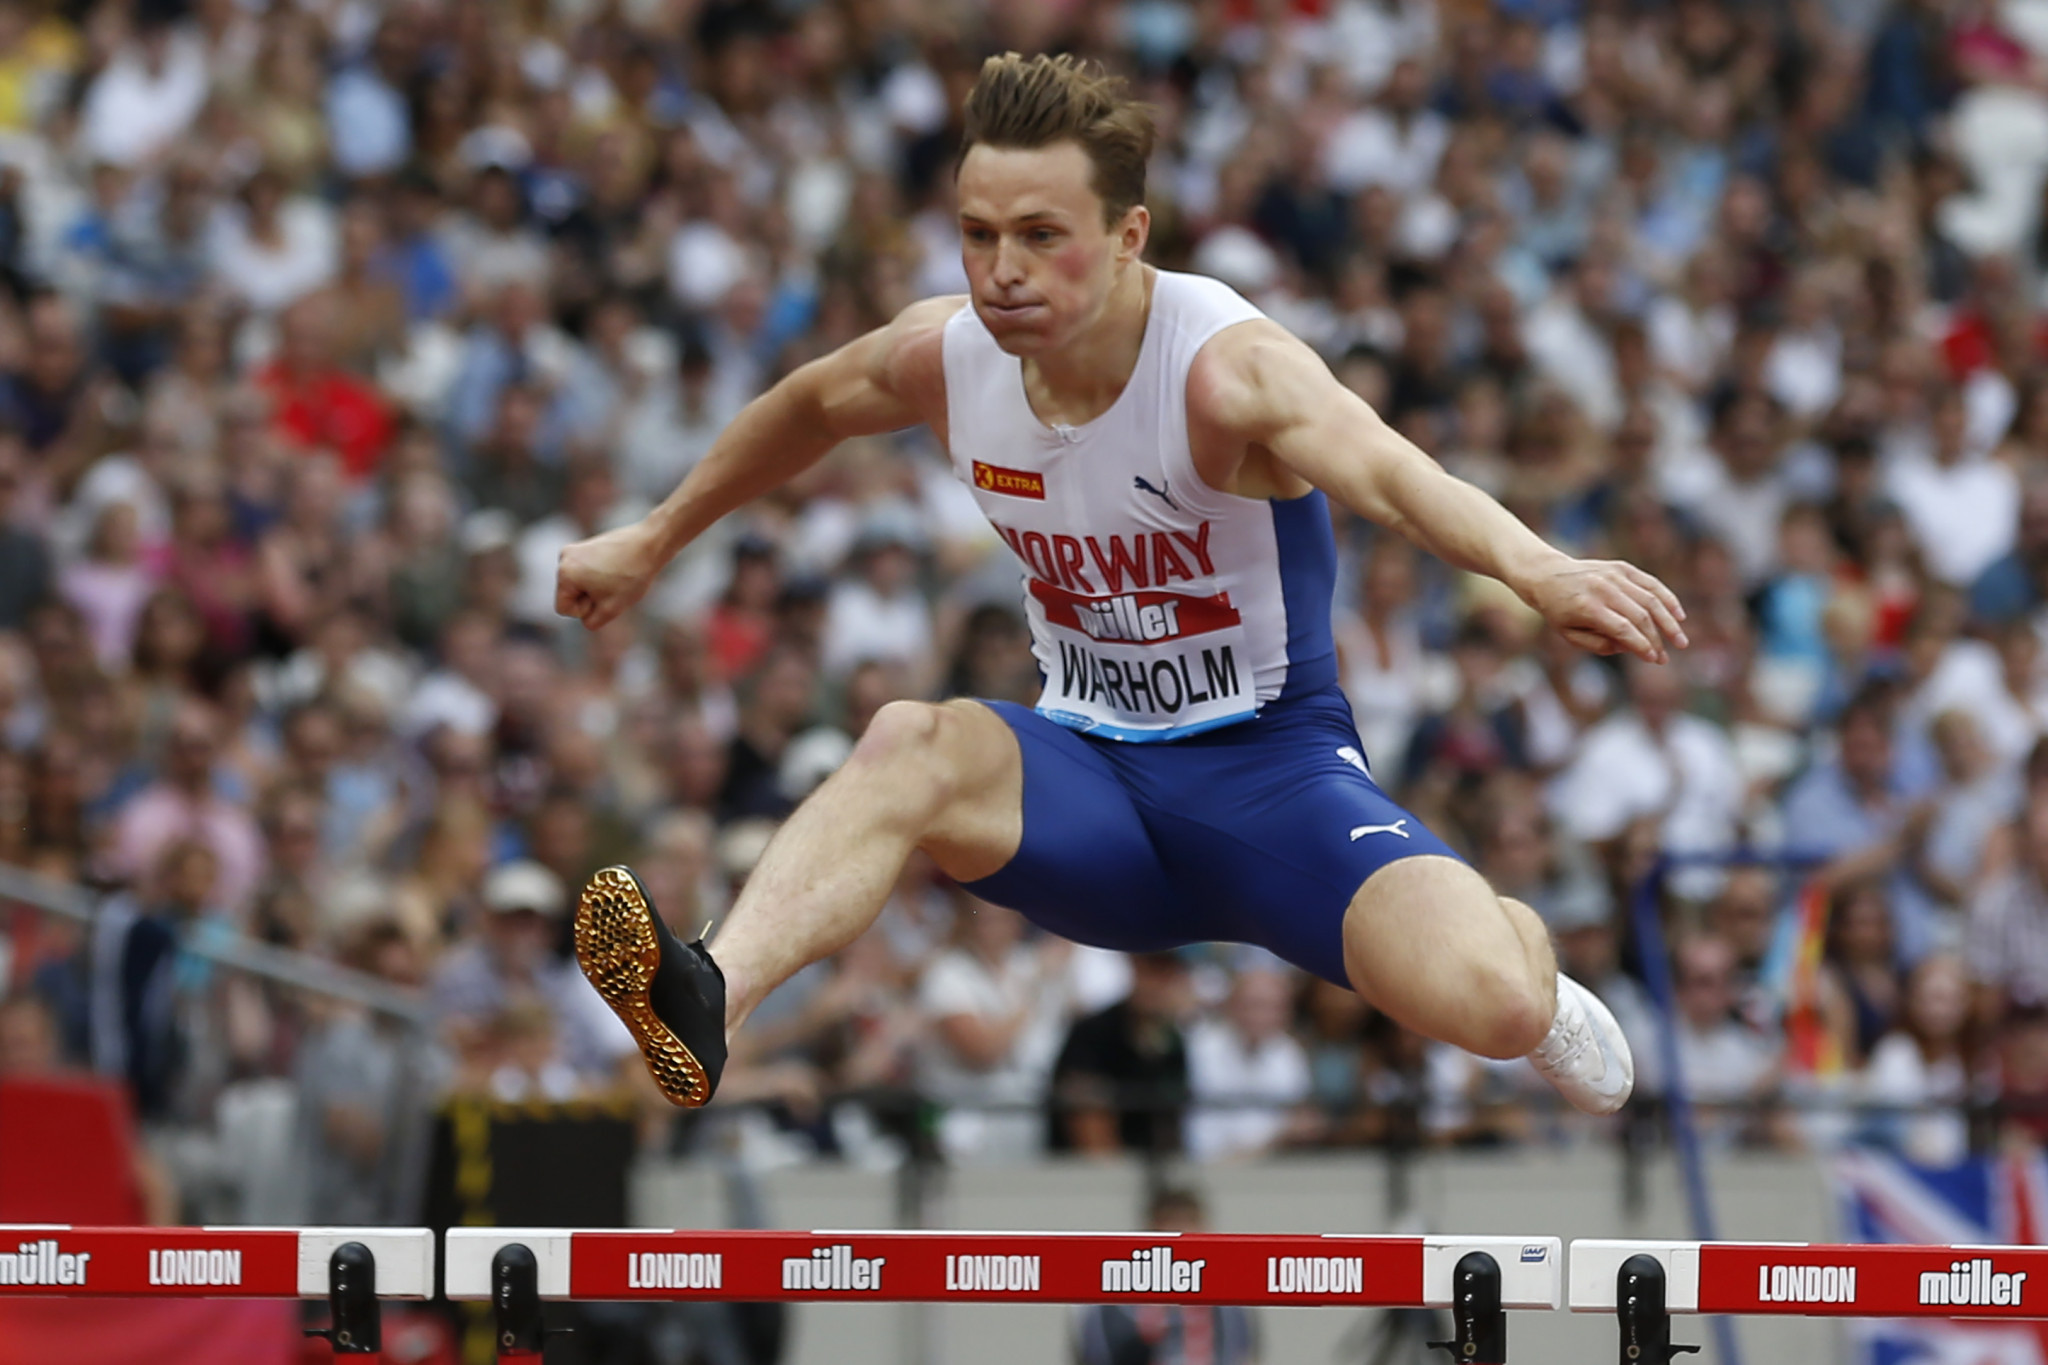 Warholm lowers his European 400m hurdles record on first day of London Diamond League meeting